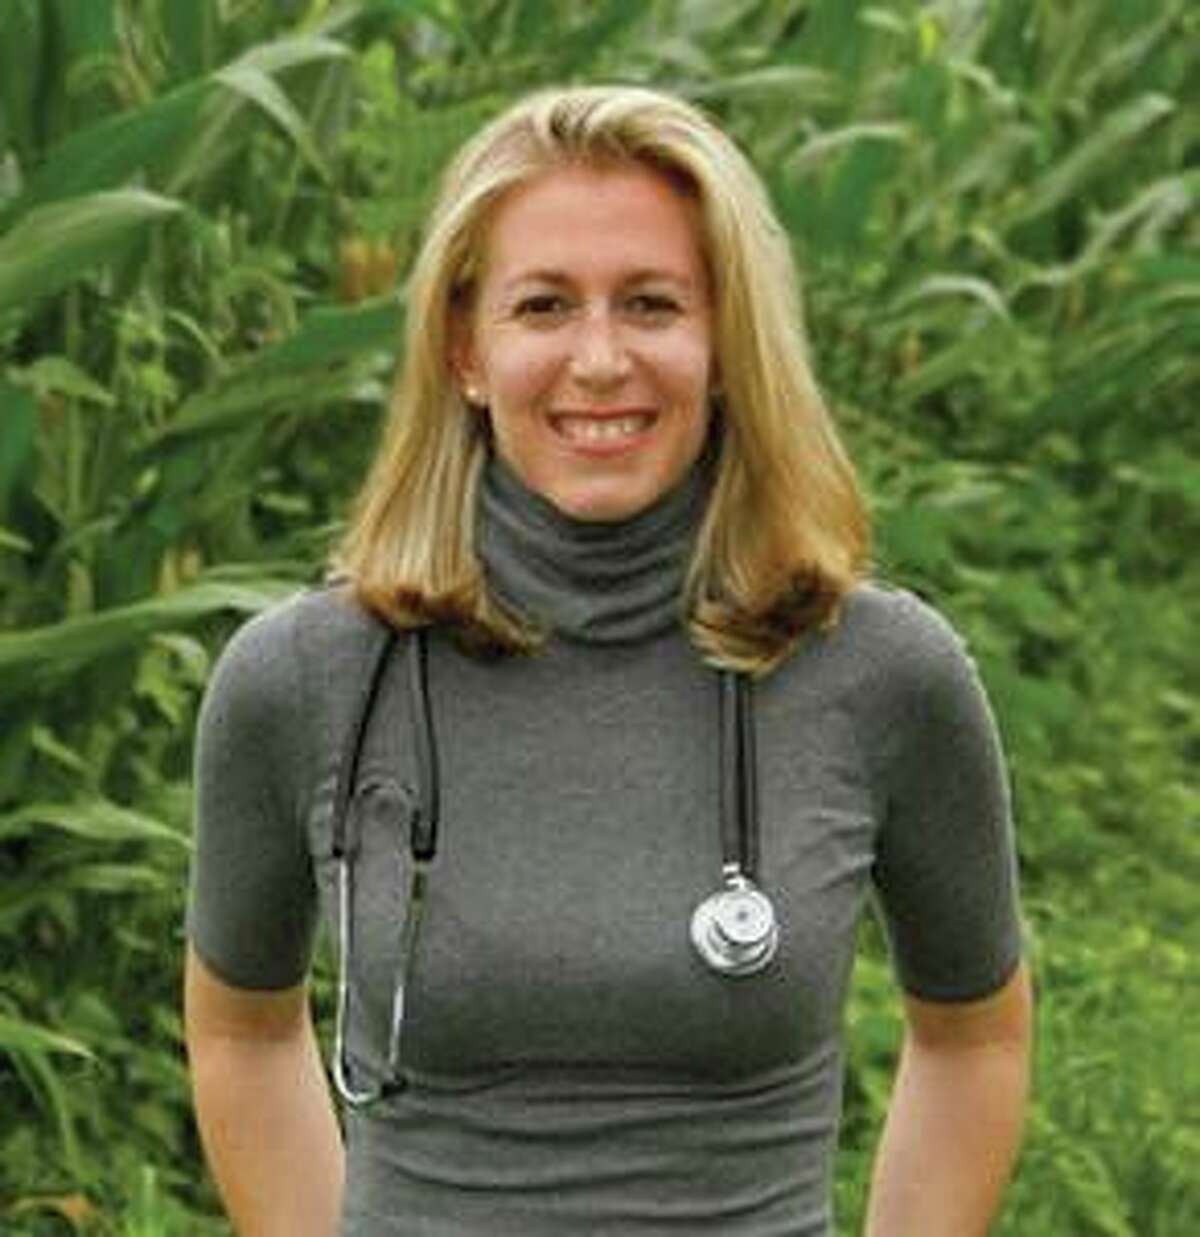 Integrative physician Dr. Aly Cohen will discuss “Are Environmental Exposures a Danger to Your Mental Health?” November 13 at WCSU in Danbury.